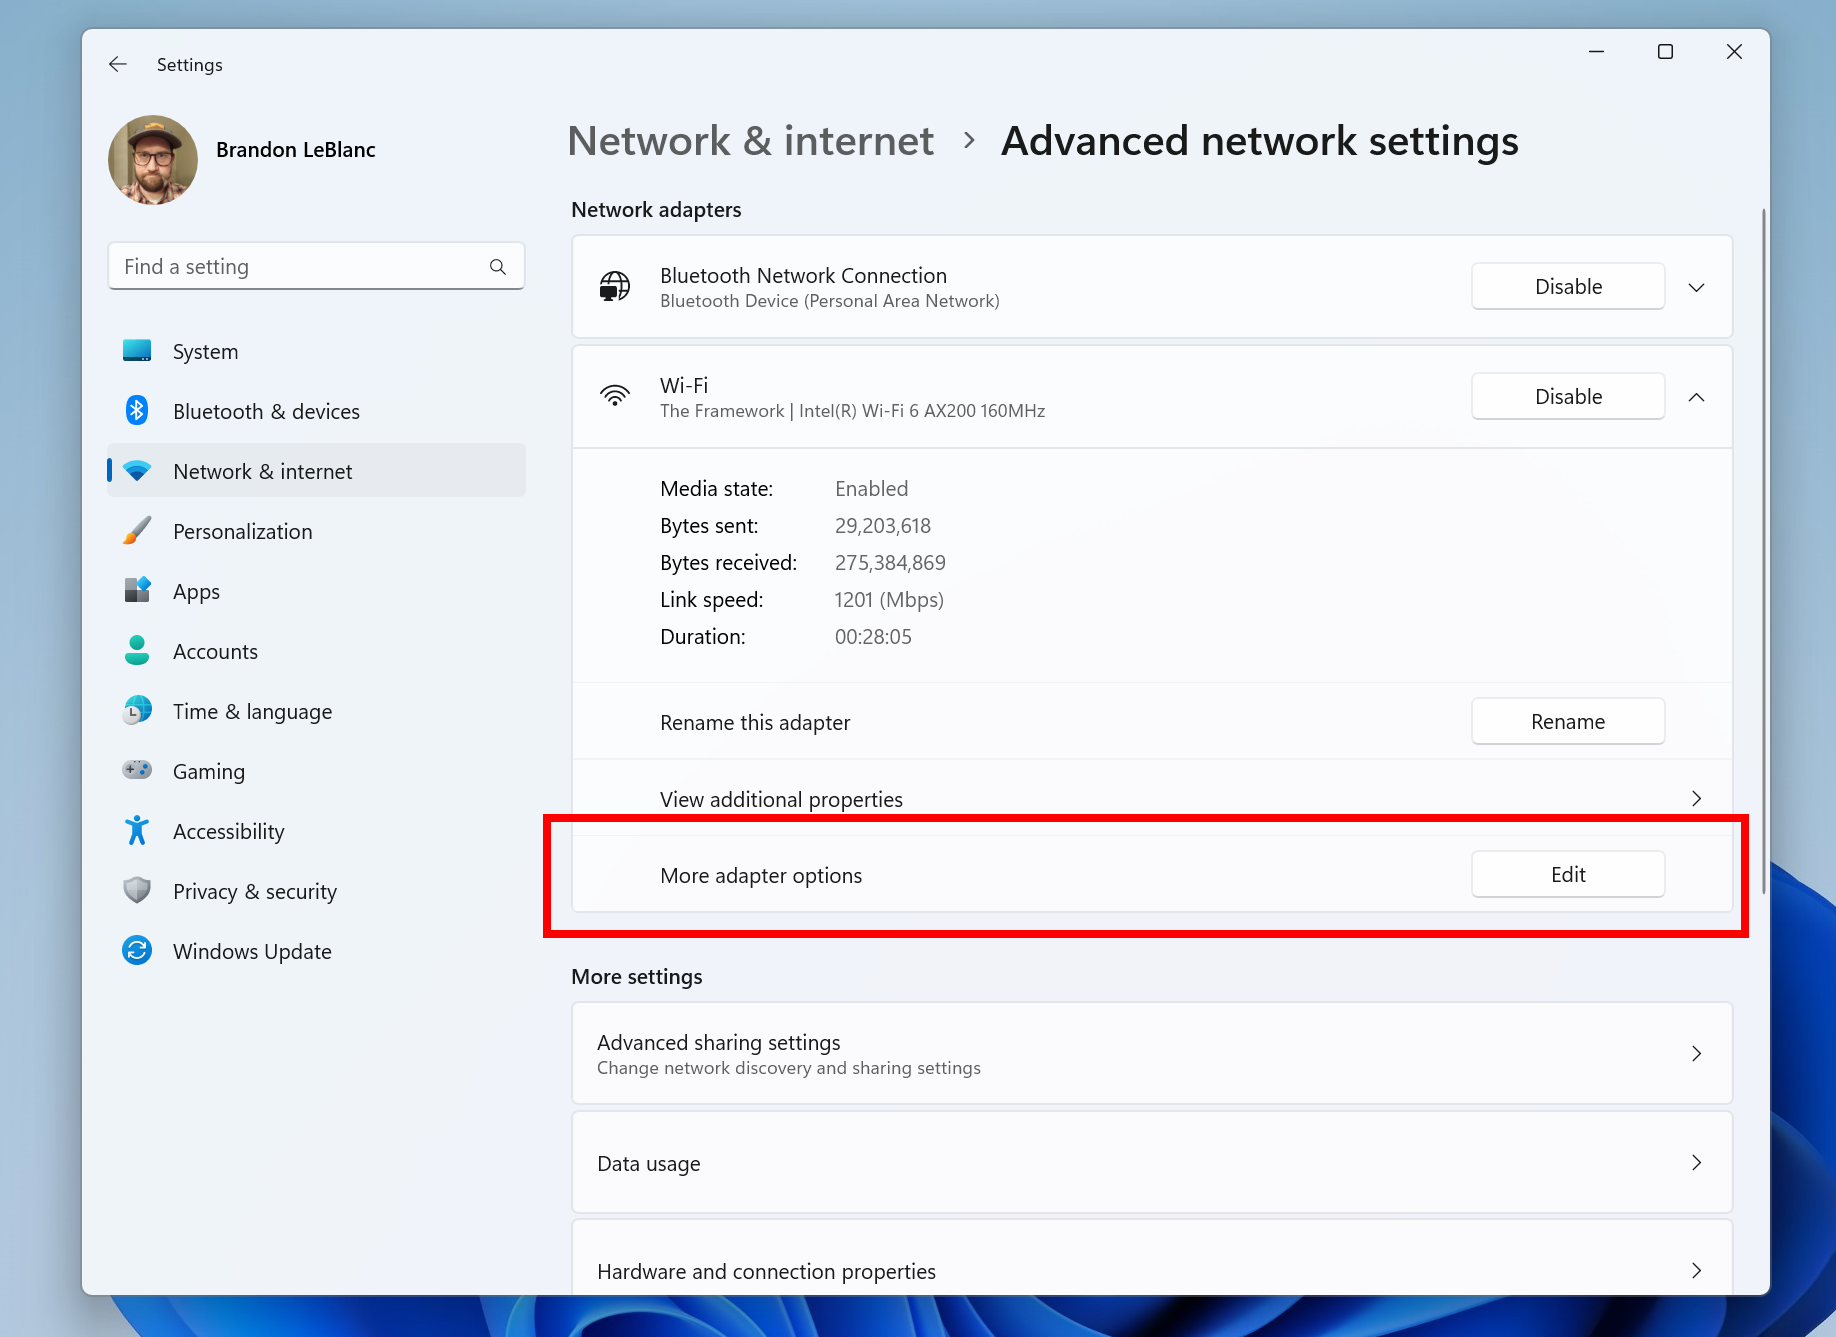 Screenshot of Windows 11 Settings app showing advanced network settings and a button to view advanced adapter options, which is highlighted